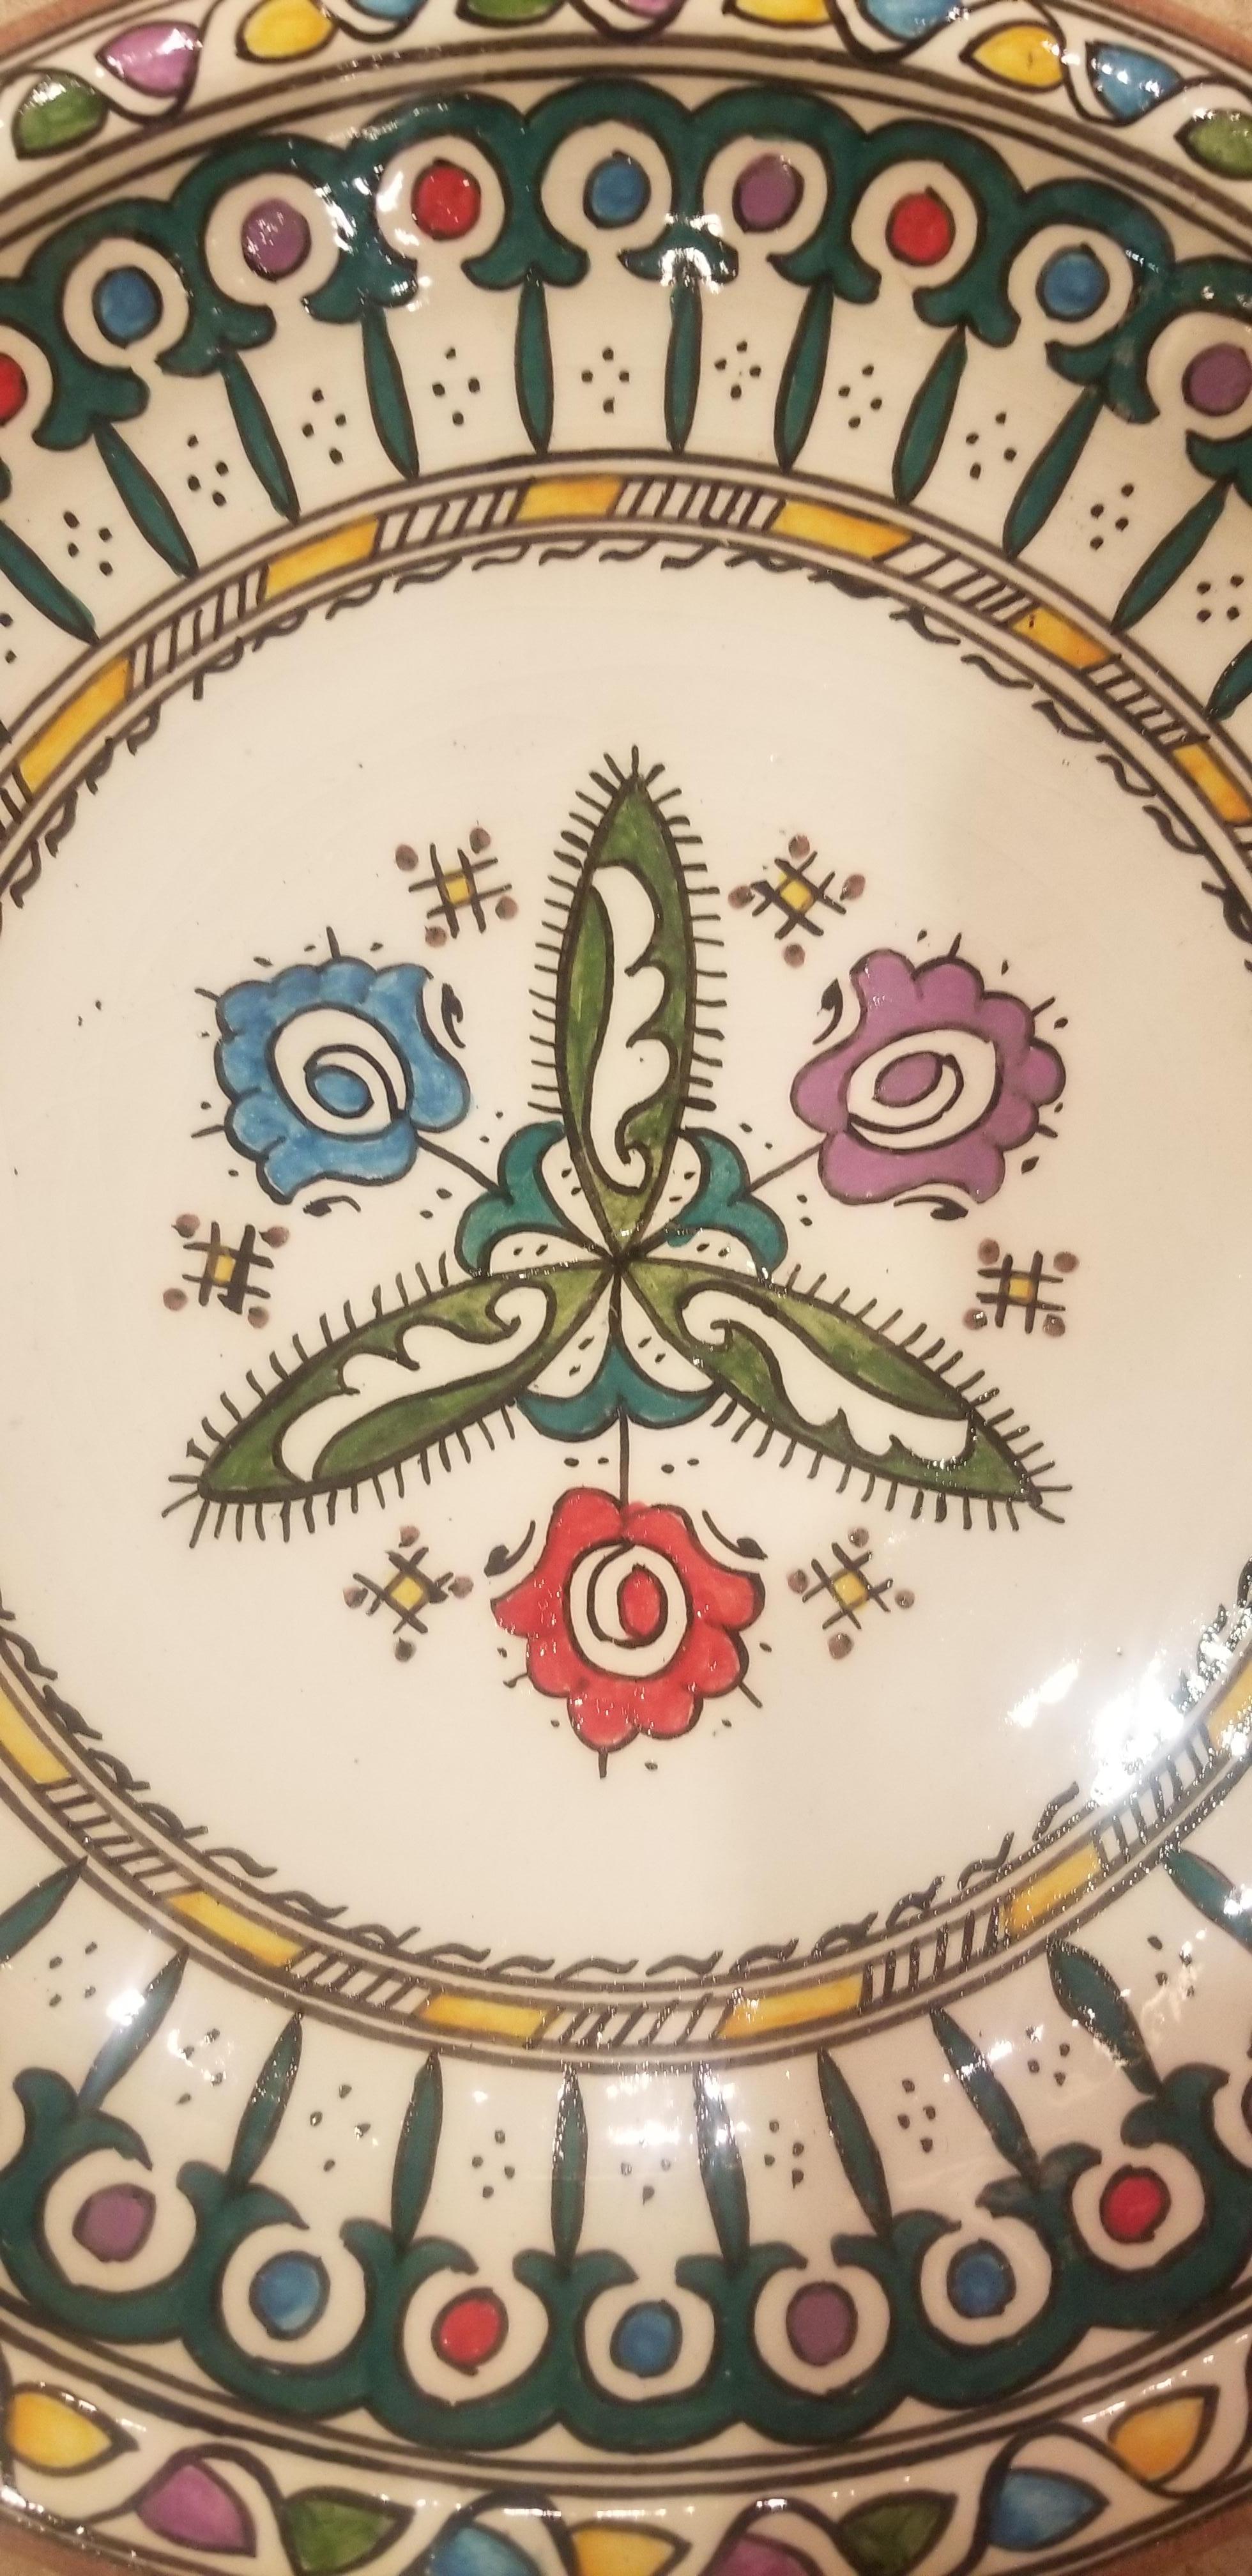 A rare or one of a kind exquisite Moroccan plate / charger not only for decoration purpose, but also to serve amazing food. This plate in hand painted and is multi-color. It would be a terrific add-on to any decor. Great Handcraftsmanship and